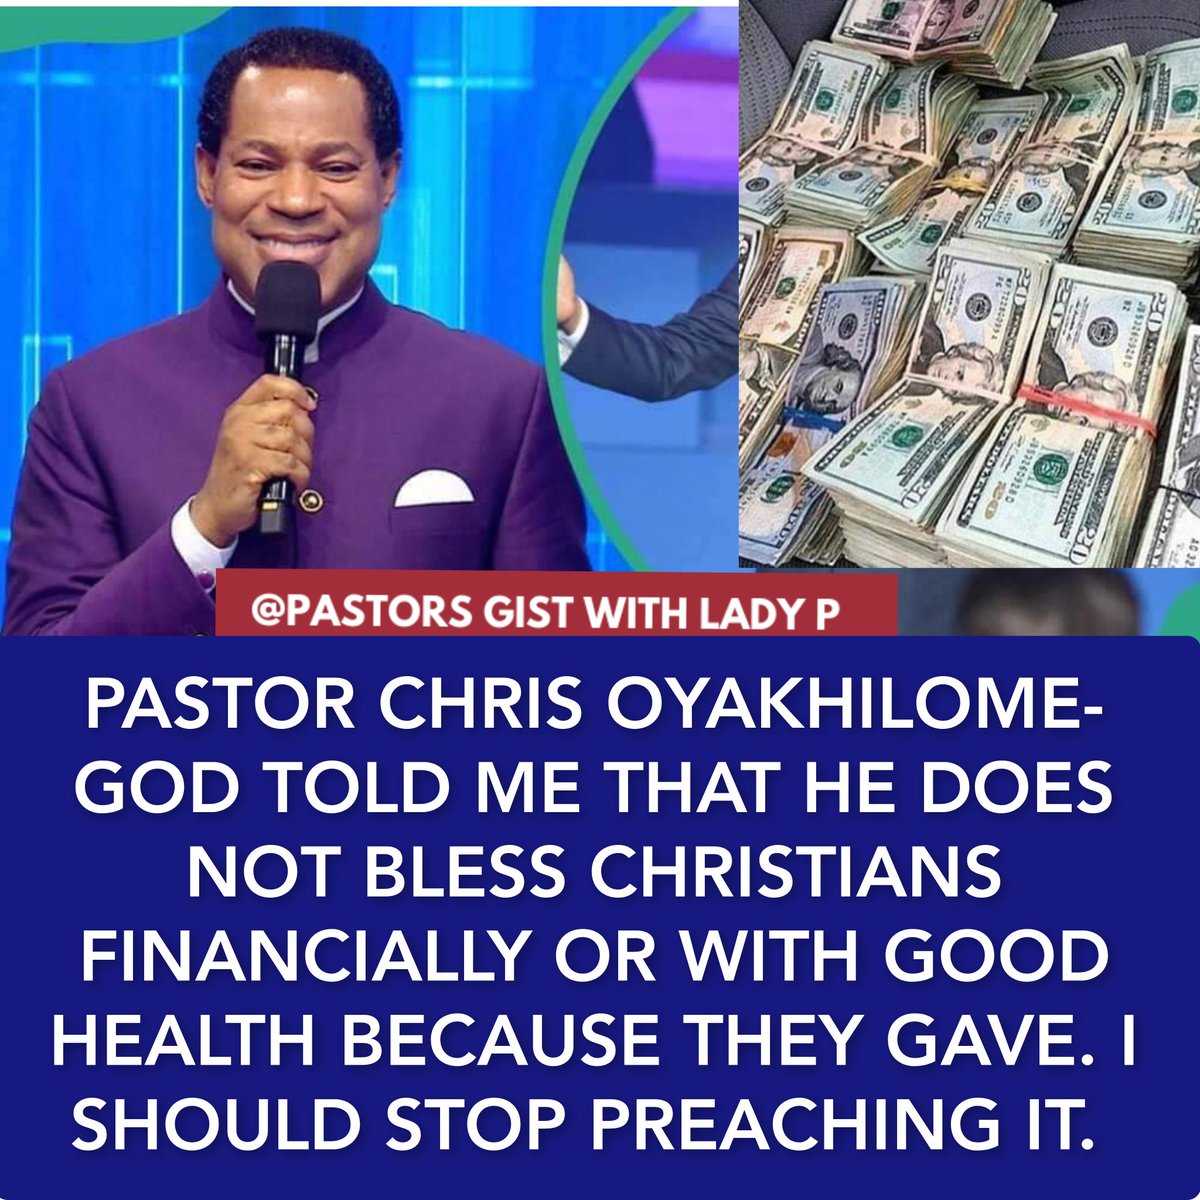 PASTOR CHRIS OYAKHILOME- GOD TOLD ME THAT HE DOES NOT BLESS CHRISTIANS FINANCIALLY WITH GOOD HEALTH BECAUSE THEY GAVE. I SHOULD STOP PREACHING IT. 

CLICK HERE TO WATCH THE VIDEO youtu.be/M8ZuU_DgwnQ

#pastorchrisoyakhilome #prosperitygospel #pastors #prophets  #church